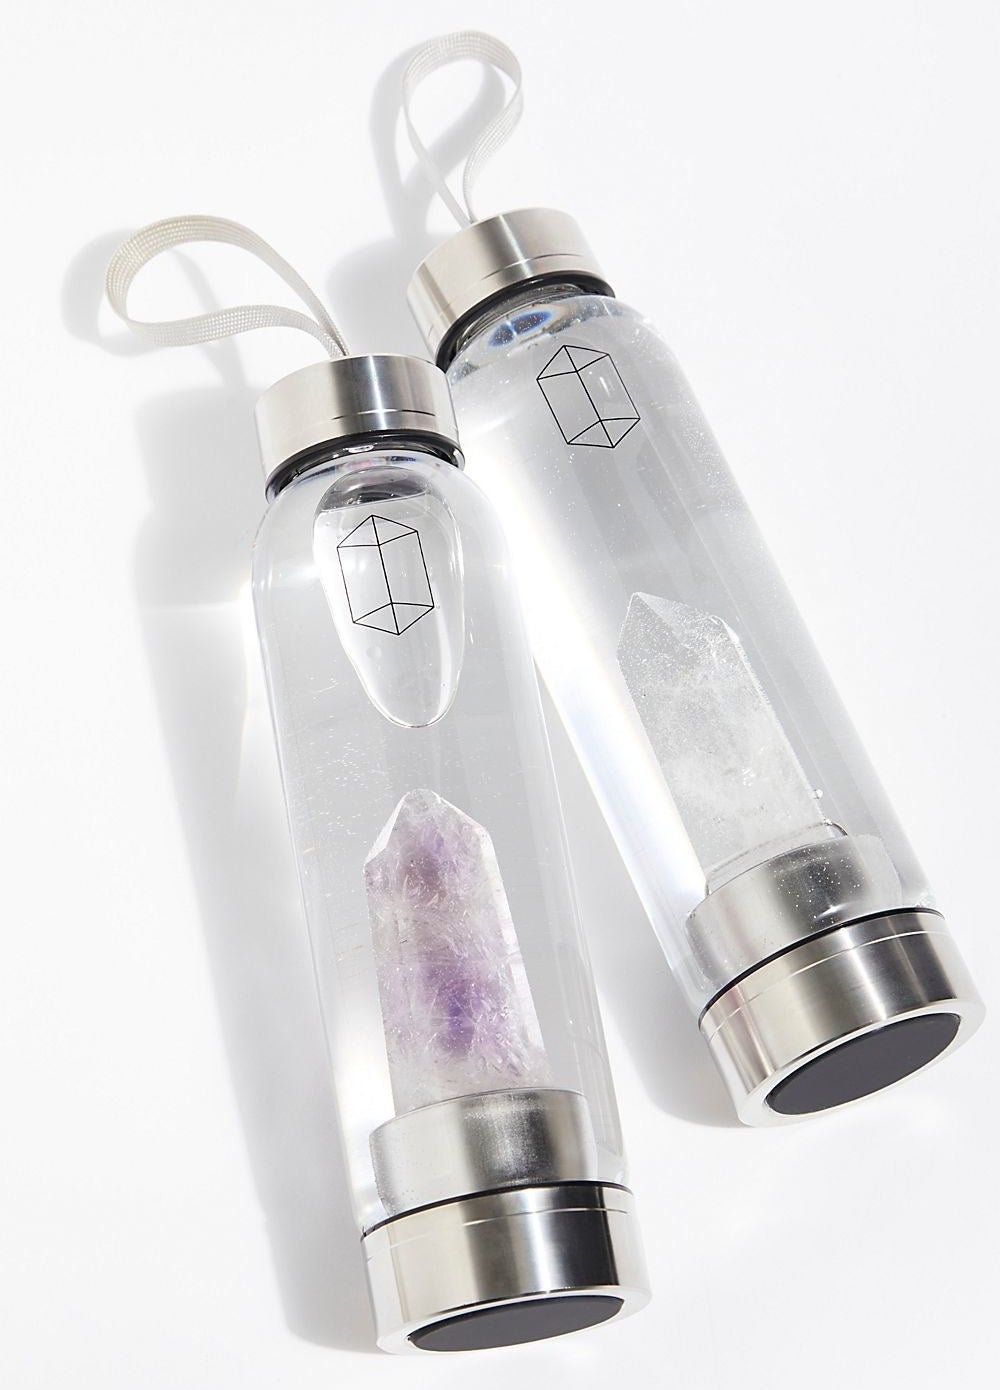 Two clear water bottles with silver bottoms and caps and crystals in the bottom of them